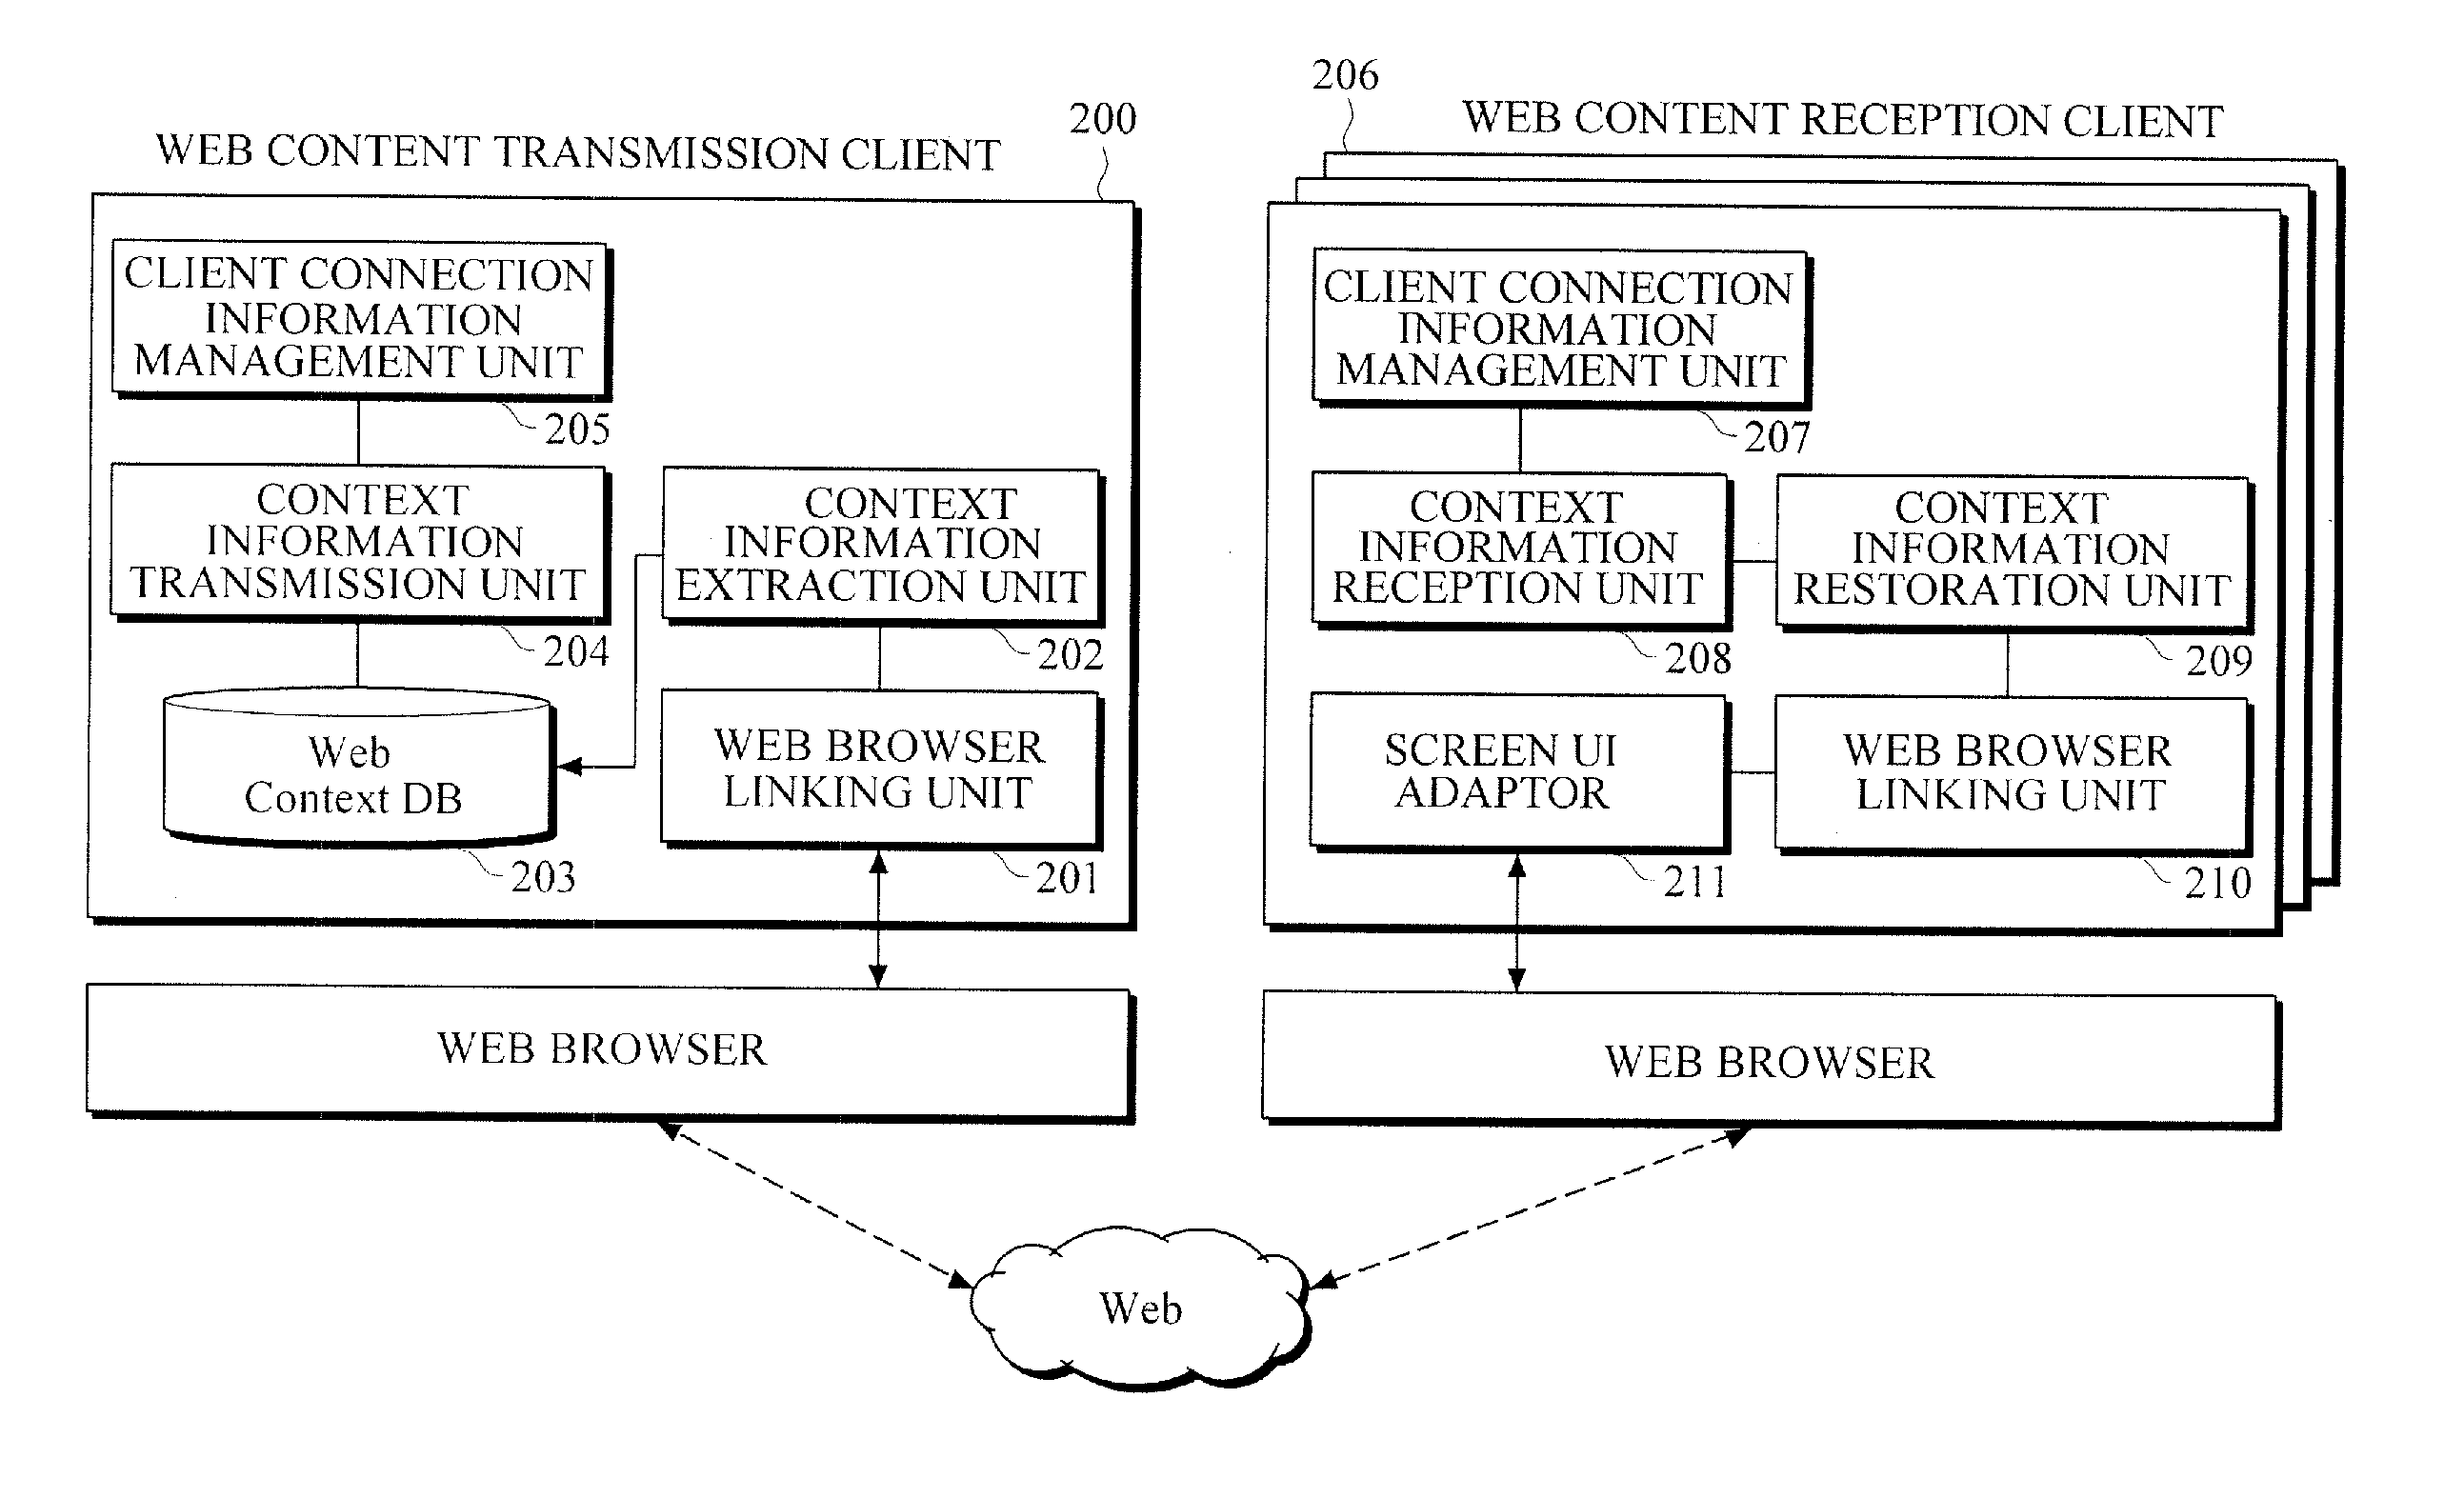 Apparatus and method for sharing web contents using inspector script